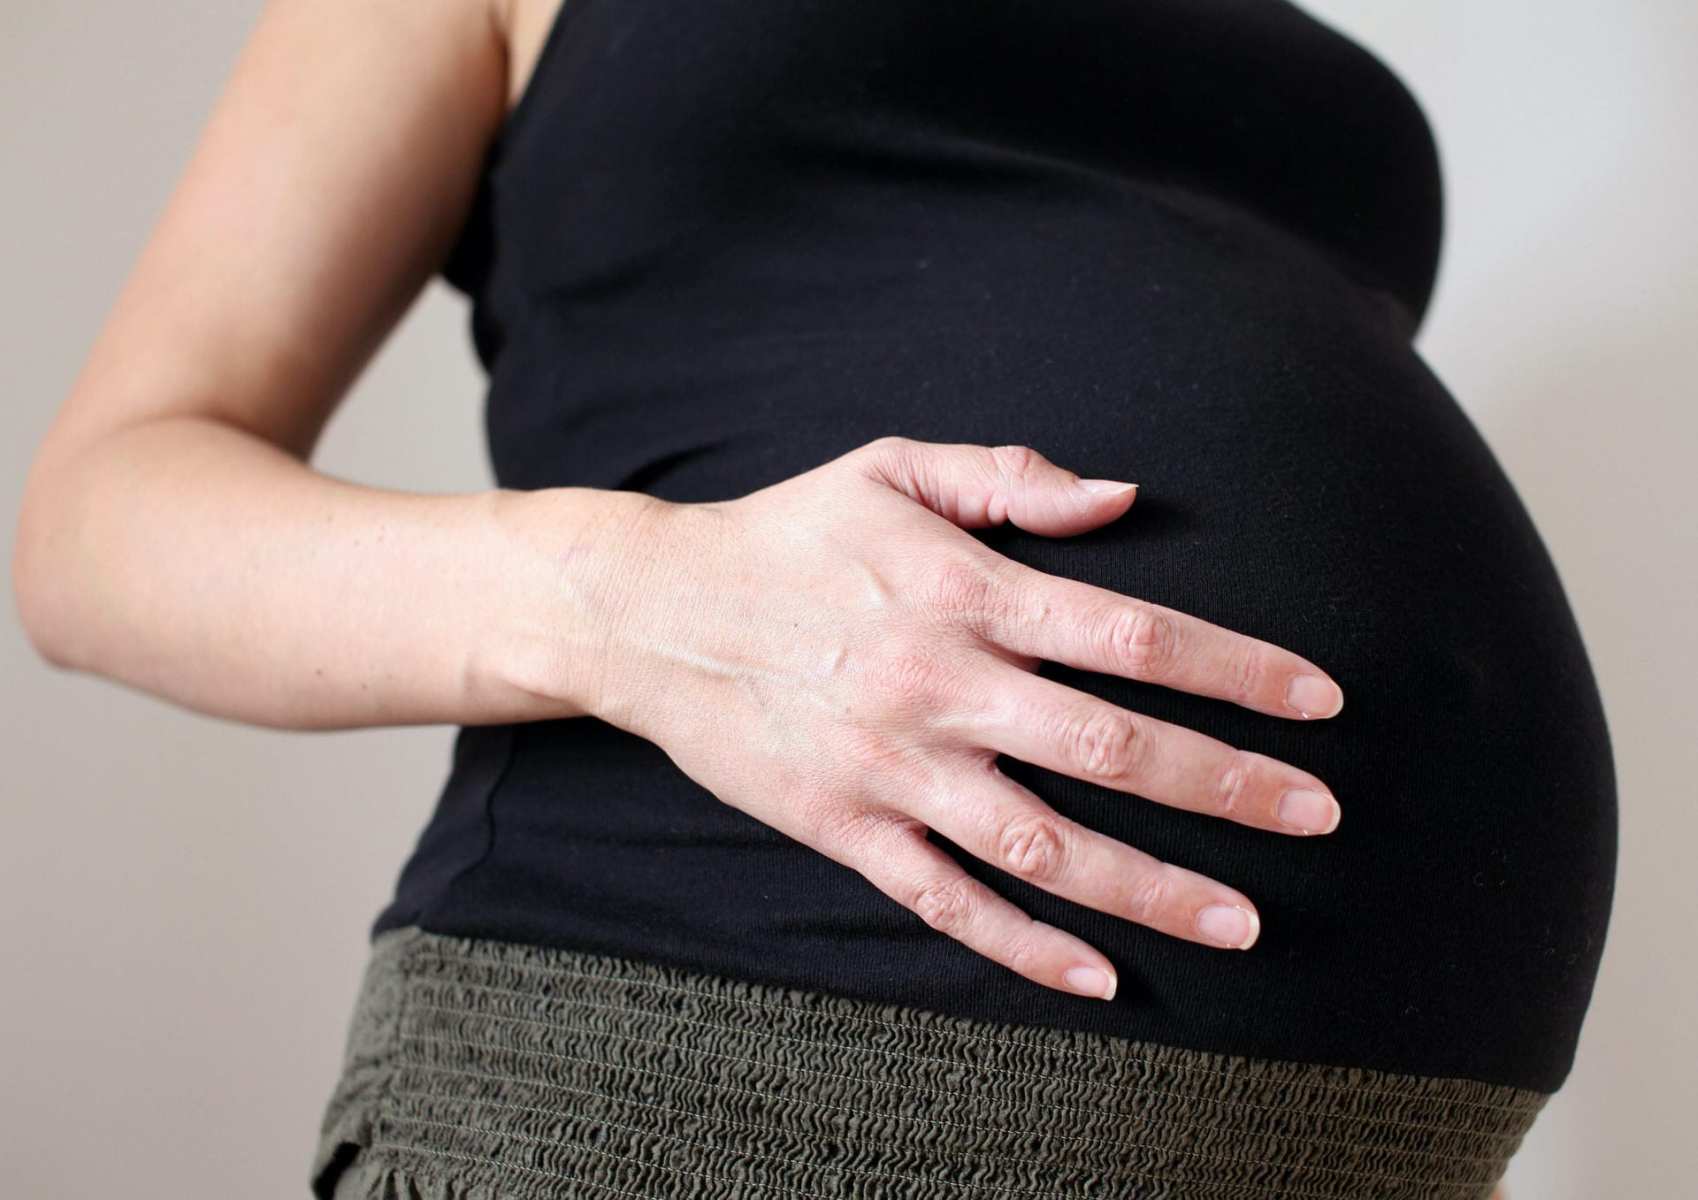 A pregnant woman puts her hand on her belly.